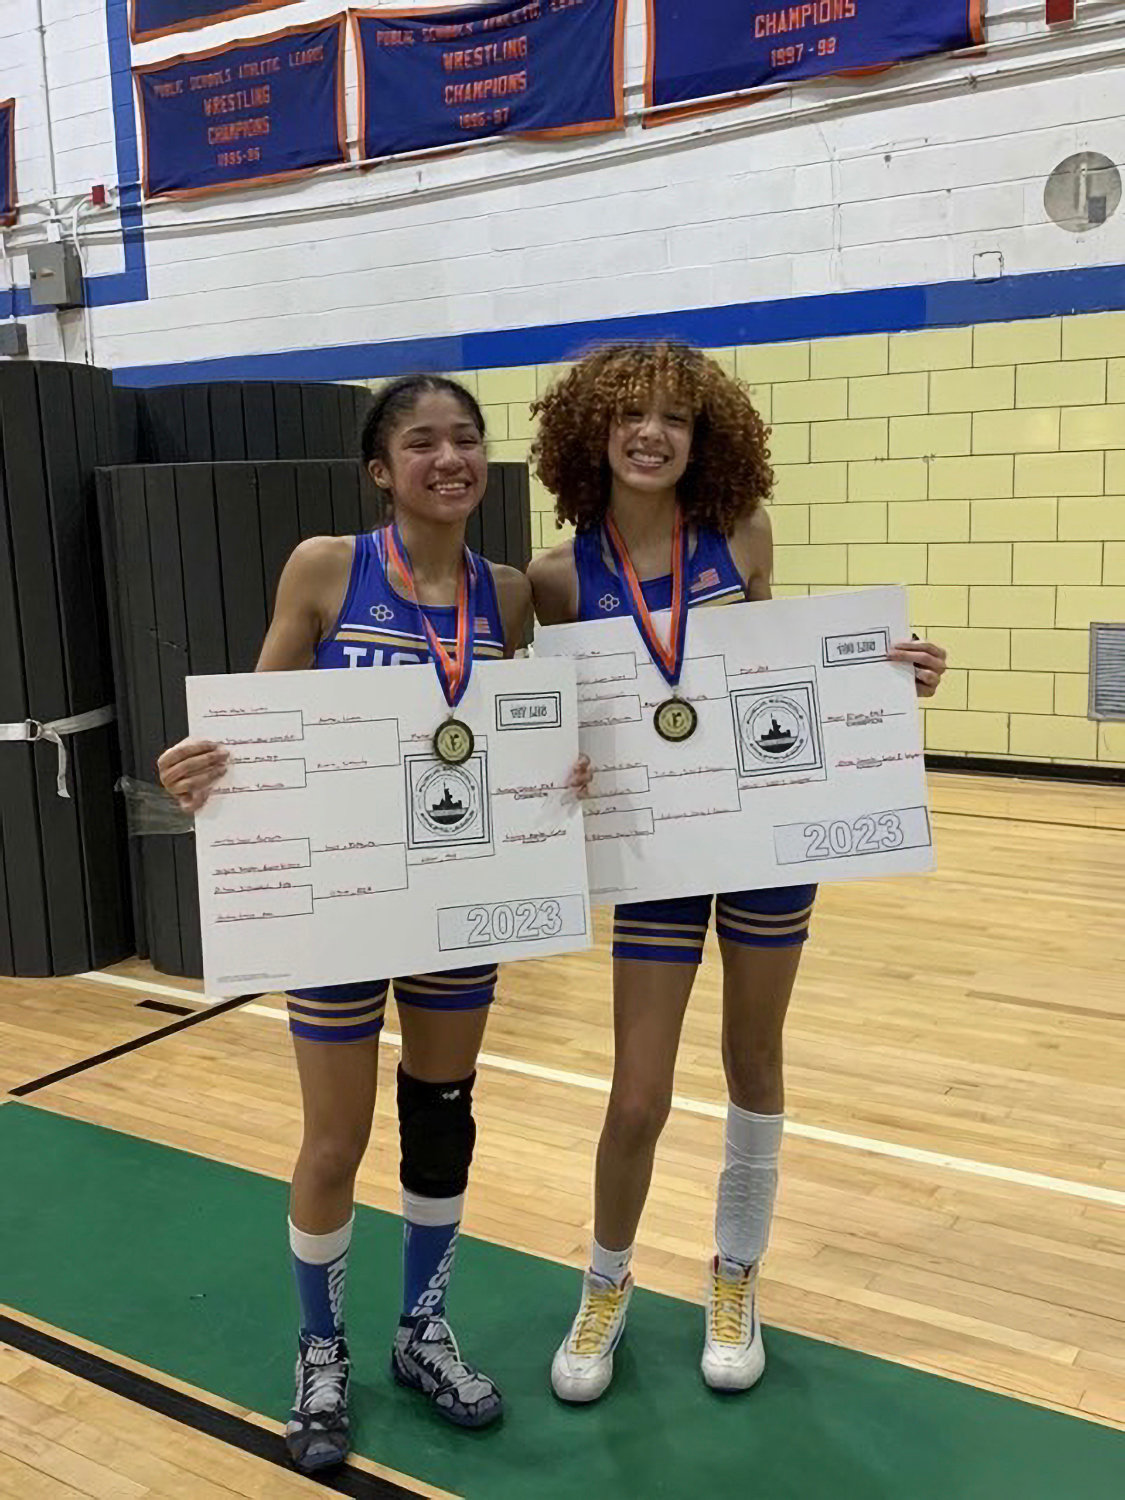 Lexi Elson and Destiny Gibson-Brown holding their bracket cards during a recent wrestling match. The two have been pioneers as female wrestlers on the boys high school team.